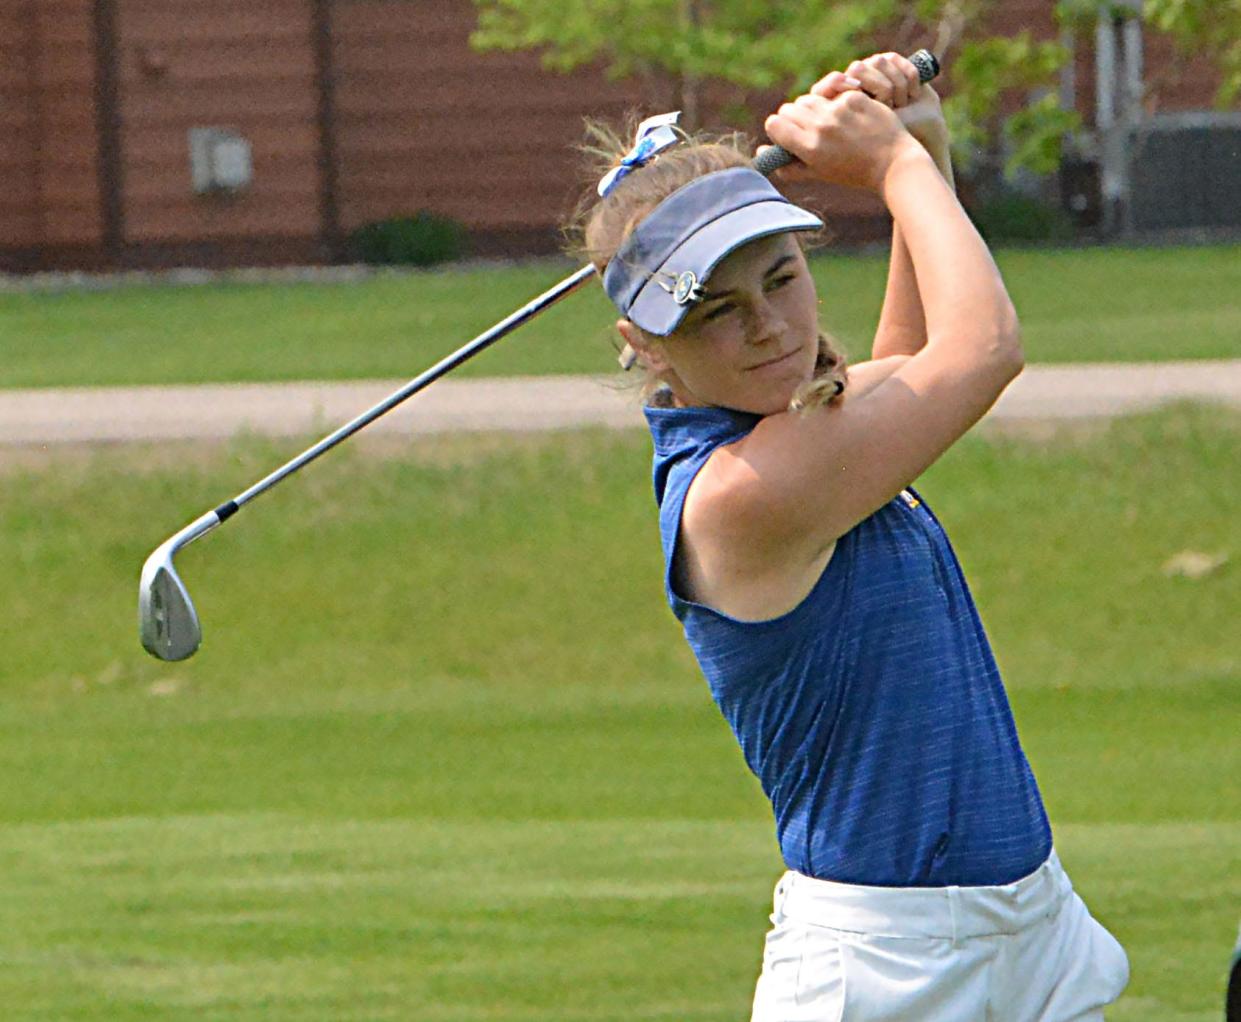 Aberdeen Central's Olivia Braun follows through on a practice swing on No. 9 Yellow during the Eastern South Dakota Conference girls golf tournament on Tuesday, May 23, 2023 at Cattail Crossing Golf Course in Watertown.